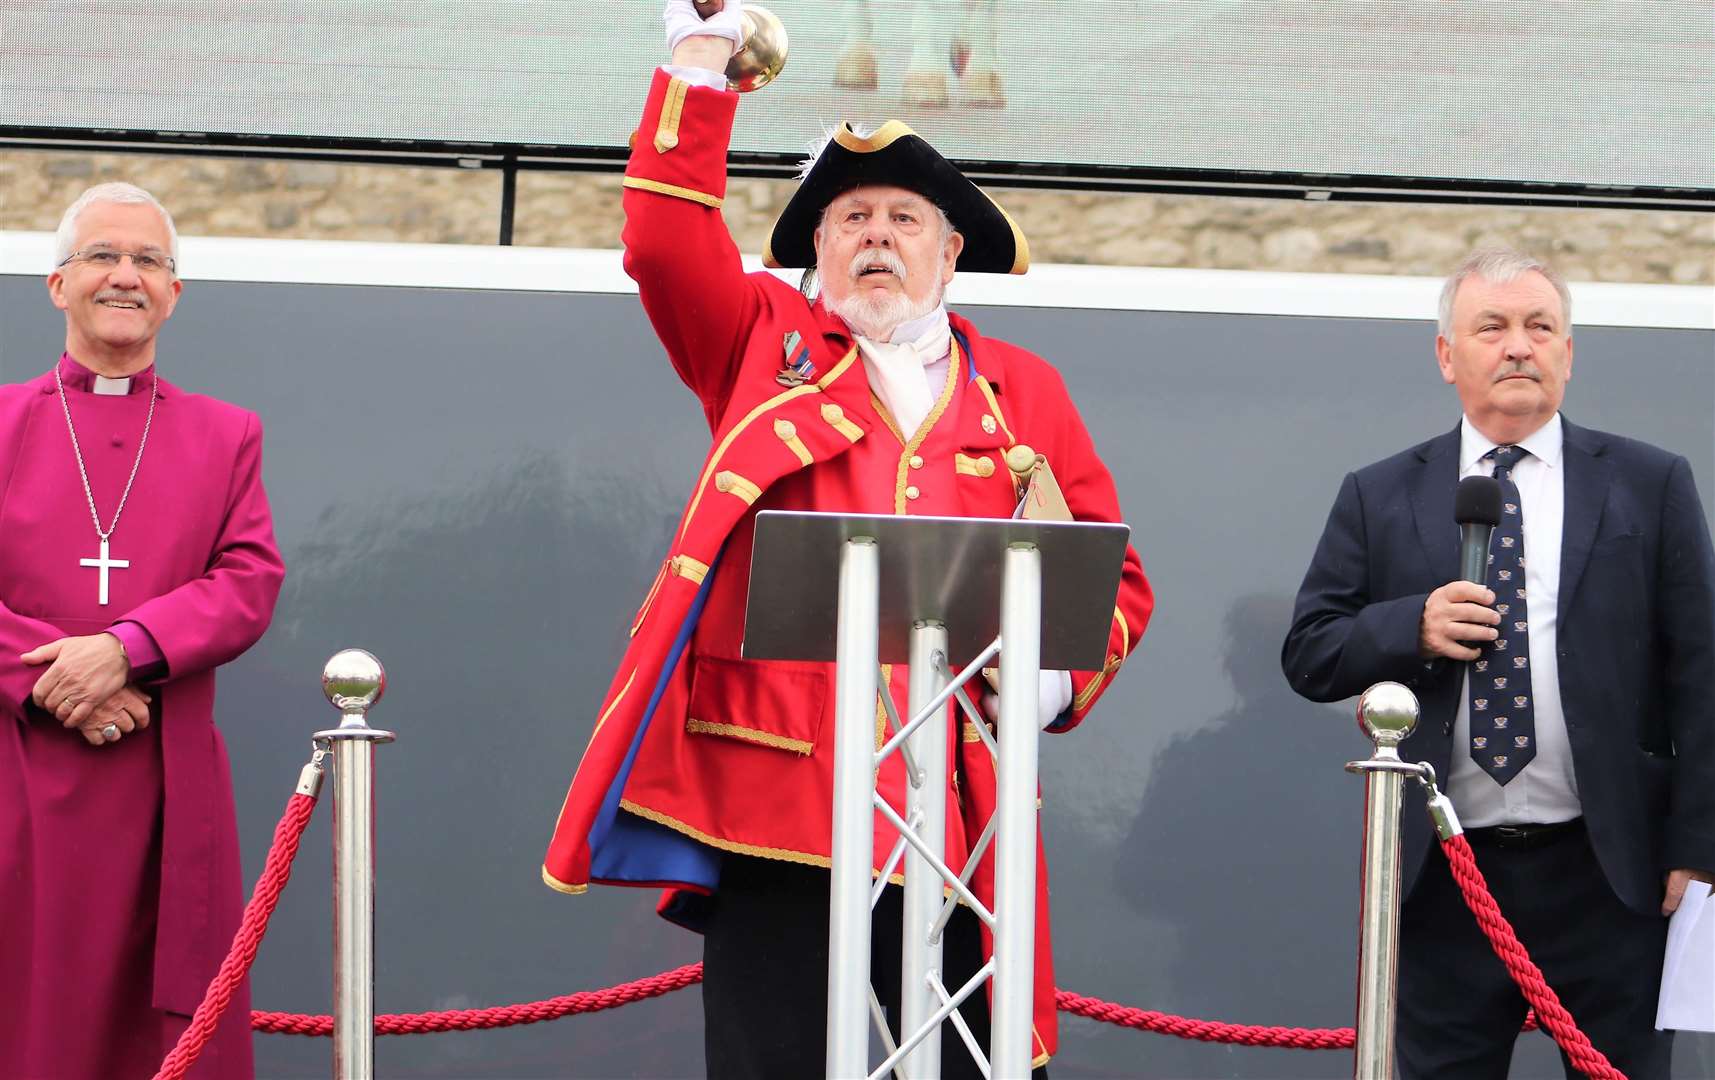 The town crier was in attendance. Picture: Rachel Evans